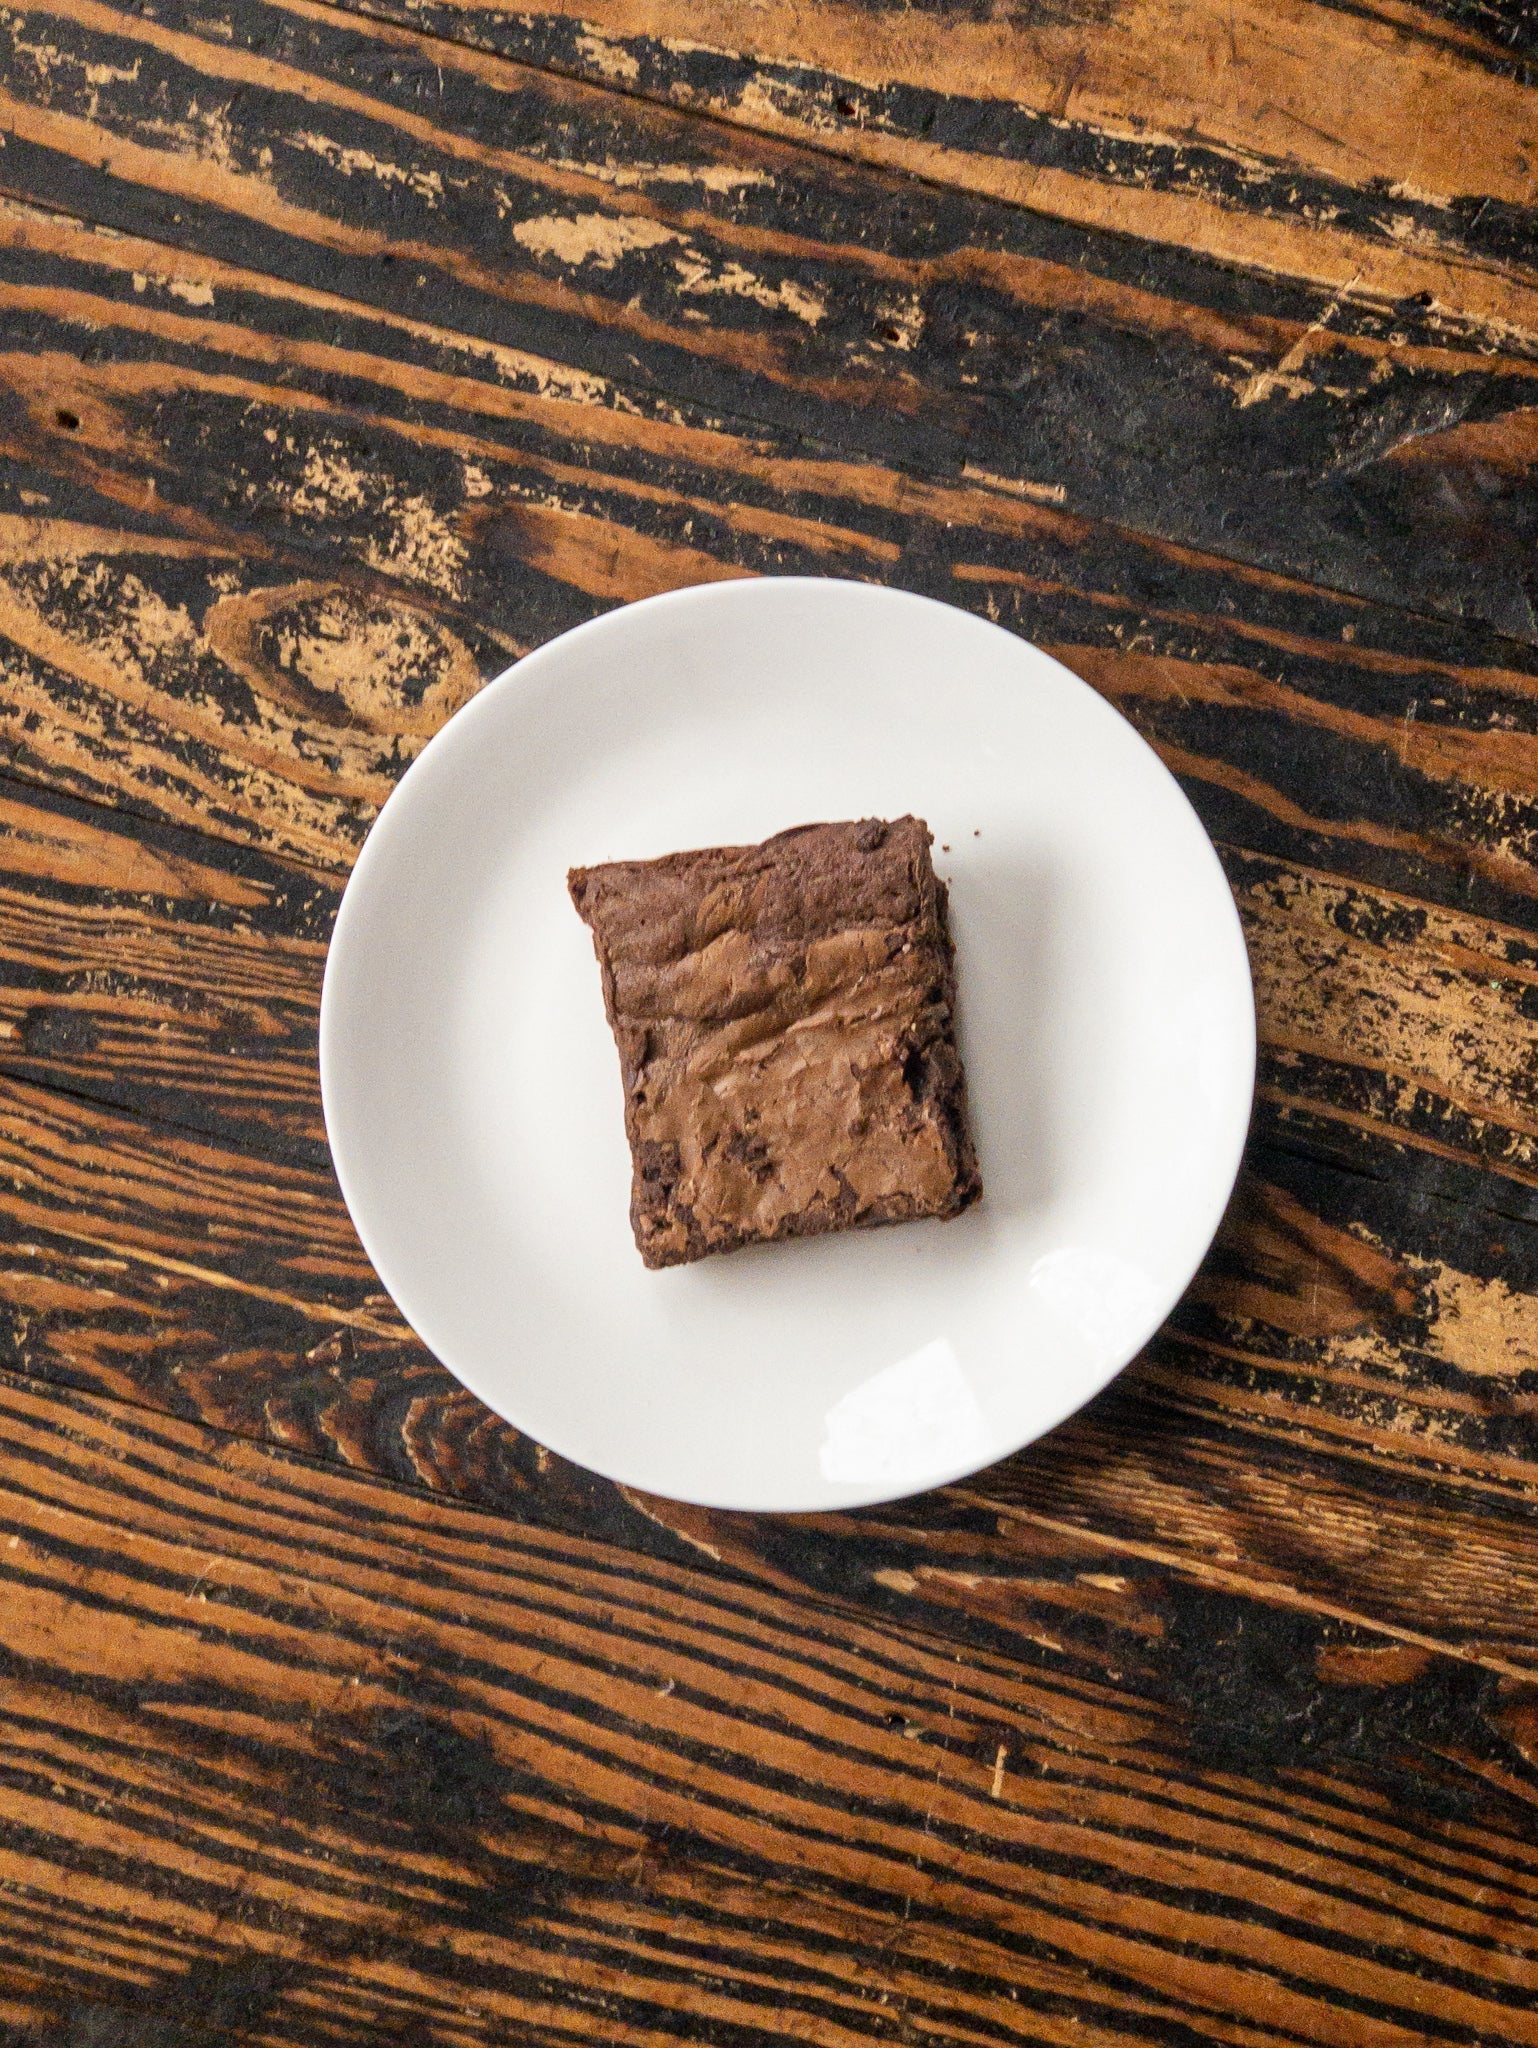 Mocha Brownie - Rich, with a Hint of our Freshly Roasted Espresso Baked Goods - The Meeting Place on Market